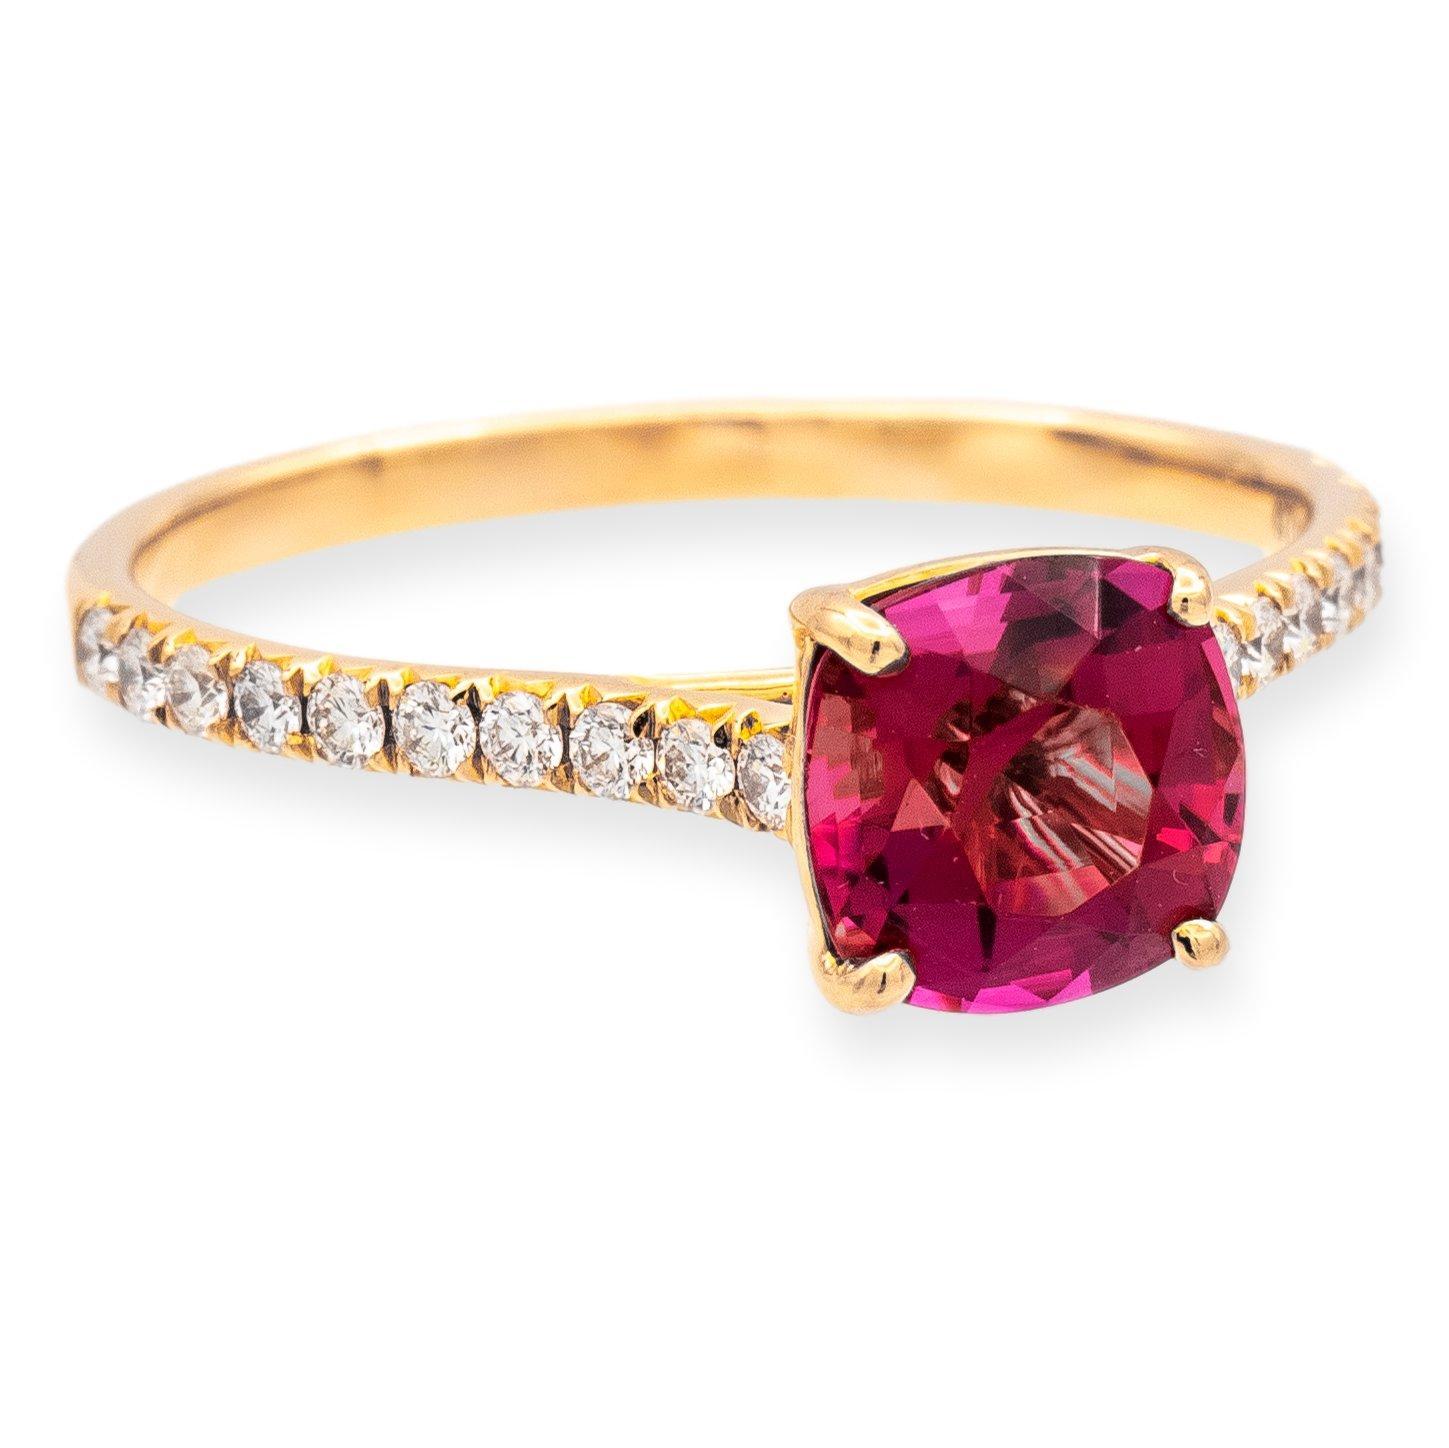 Tiffany & Co. ring from the legacy collection finely crafted in 18 karat rose gold featuring a cushion shape pink tourmaline center adorned with by a strip of bead set round brilliant cut diamonds going halfway down the shank and 2 round bezel set